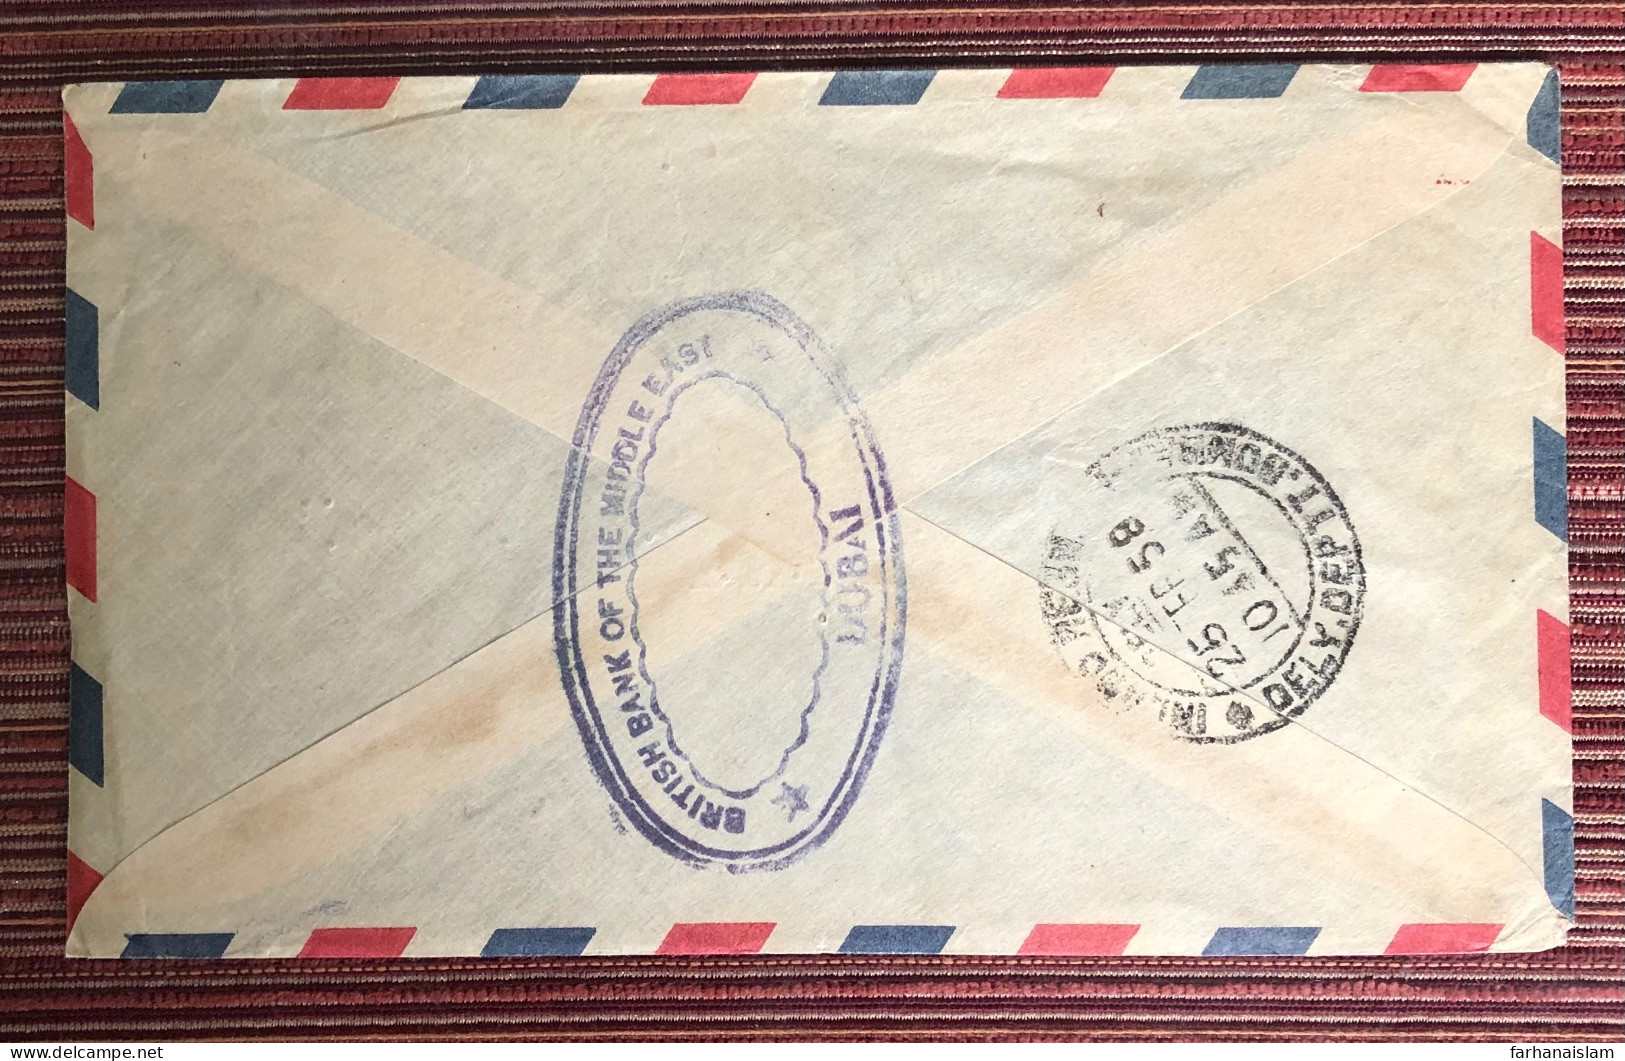 Dubai UAE 1958 Registered Cover Oman Muscat Ovpt 2 Color Used To India Bank Commercial Covers - Dubai